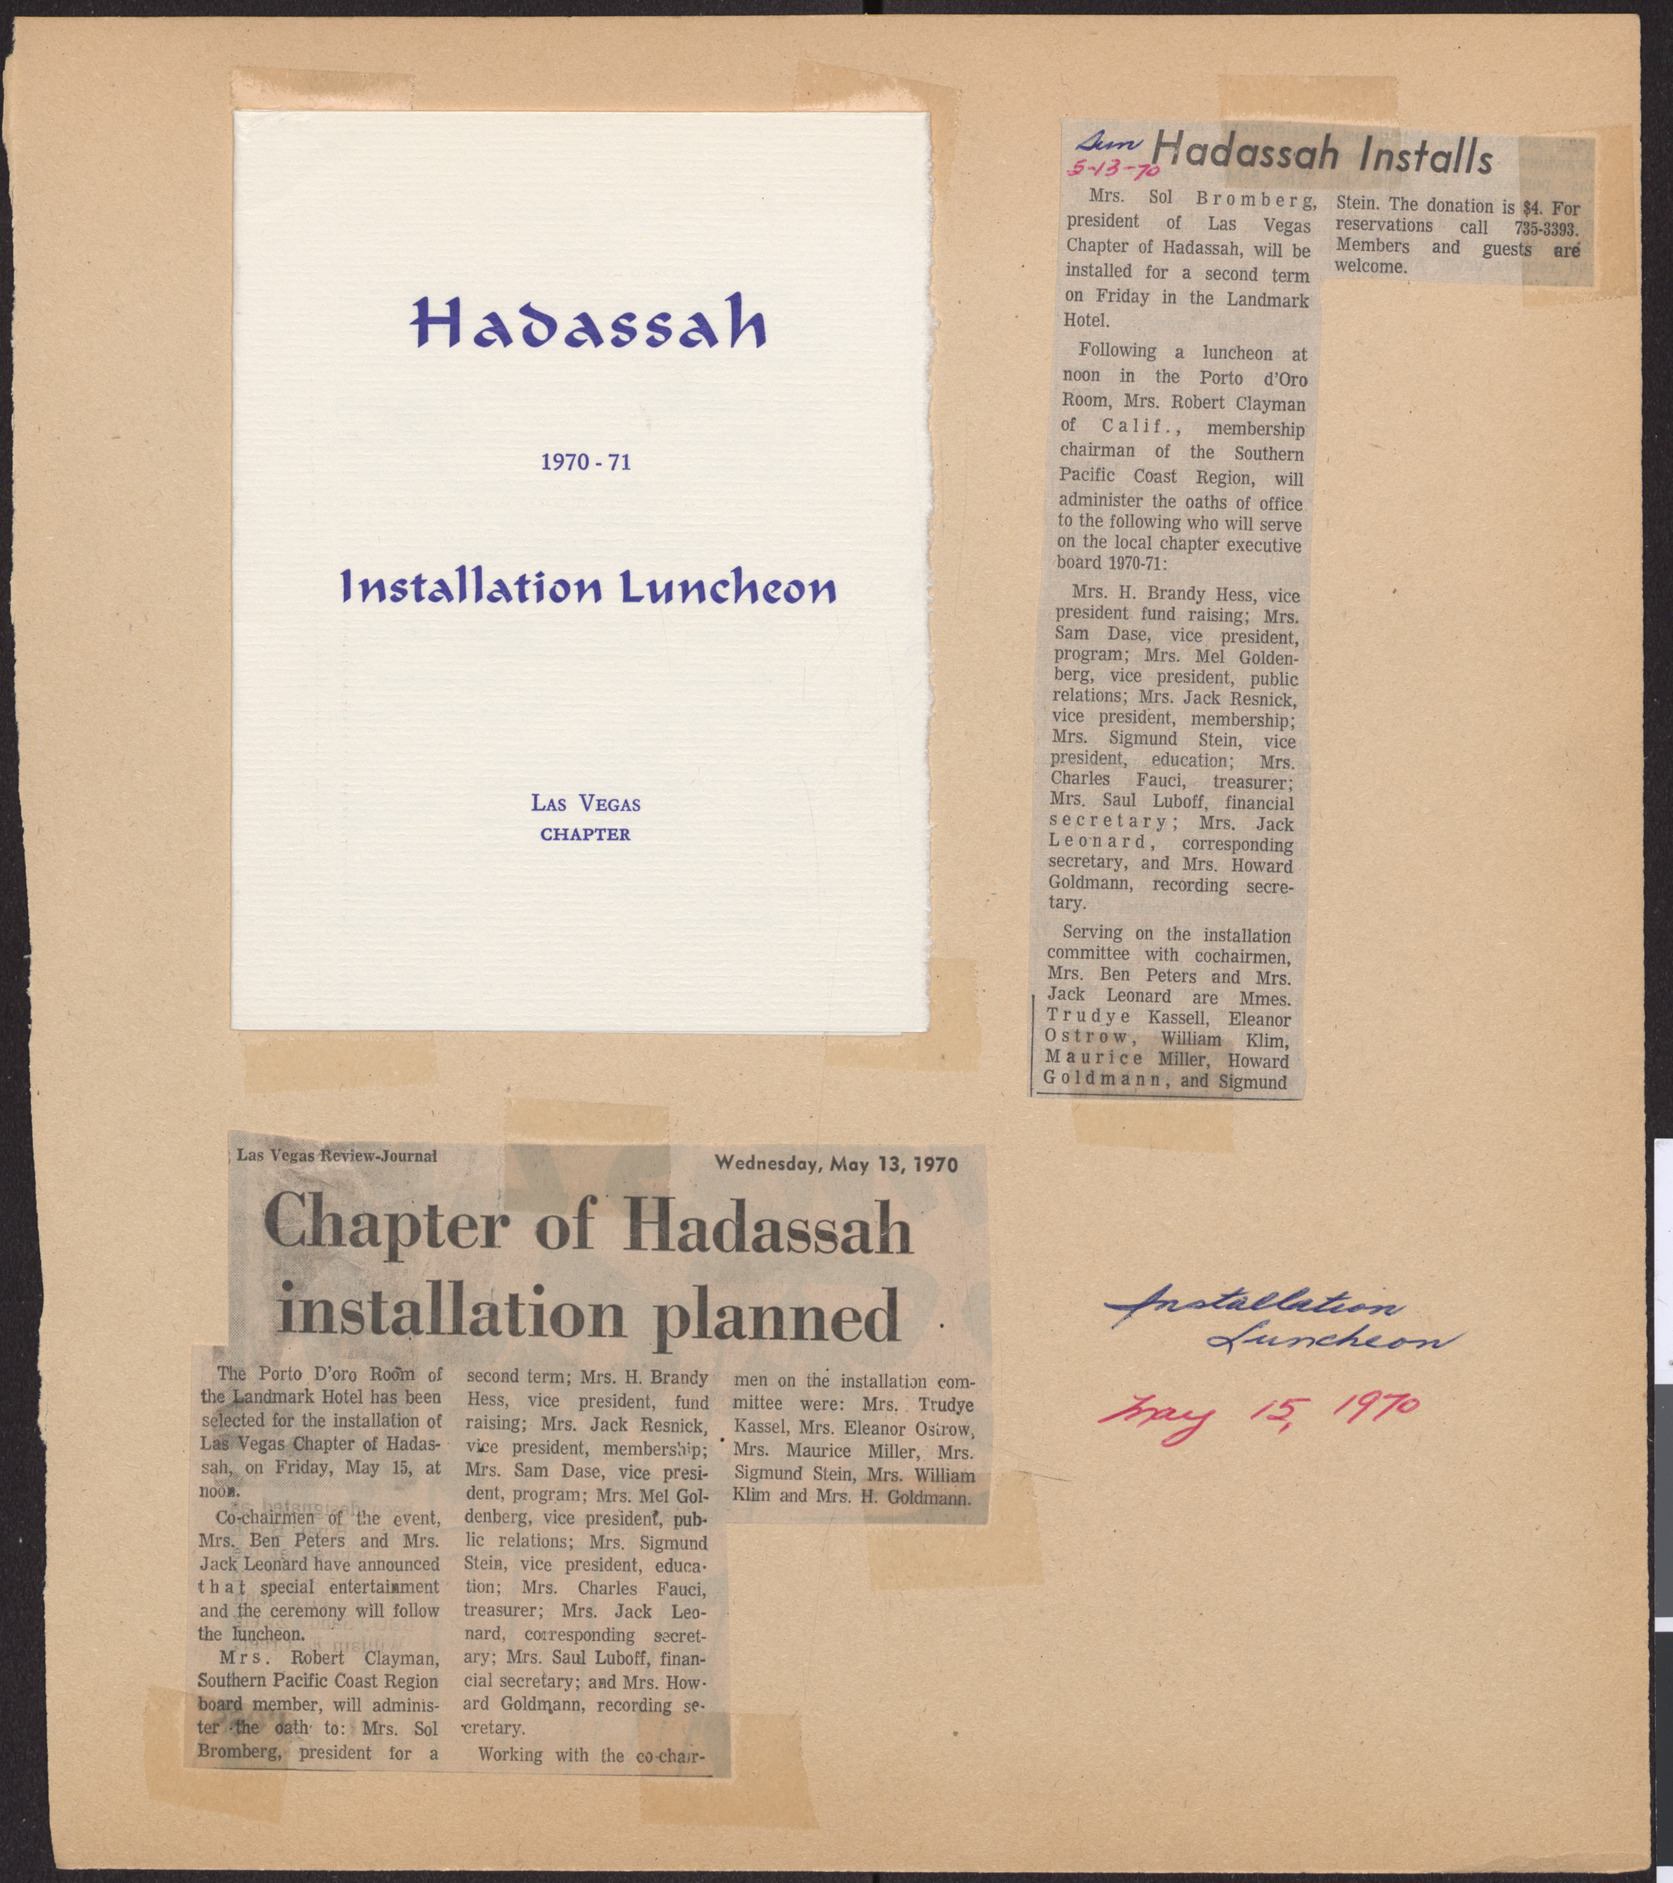 Program and newspaper clippings about Hadassah board member installation luncheon, 1970